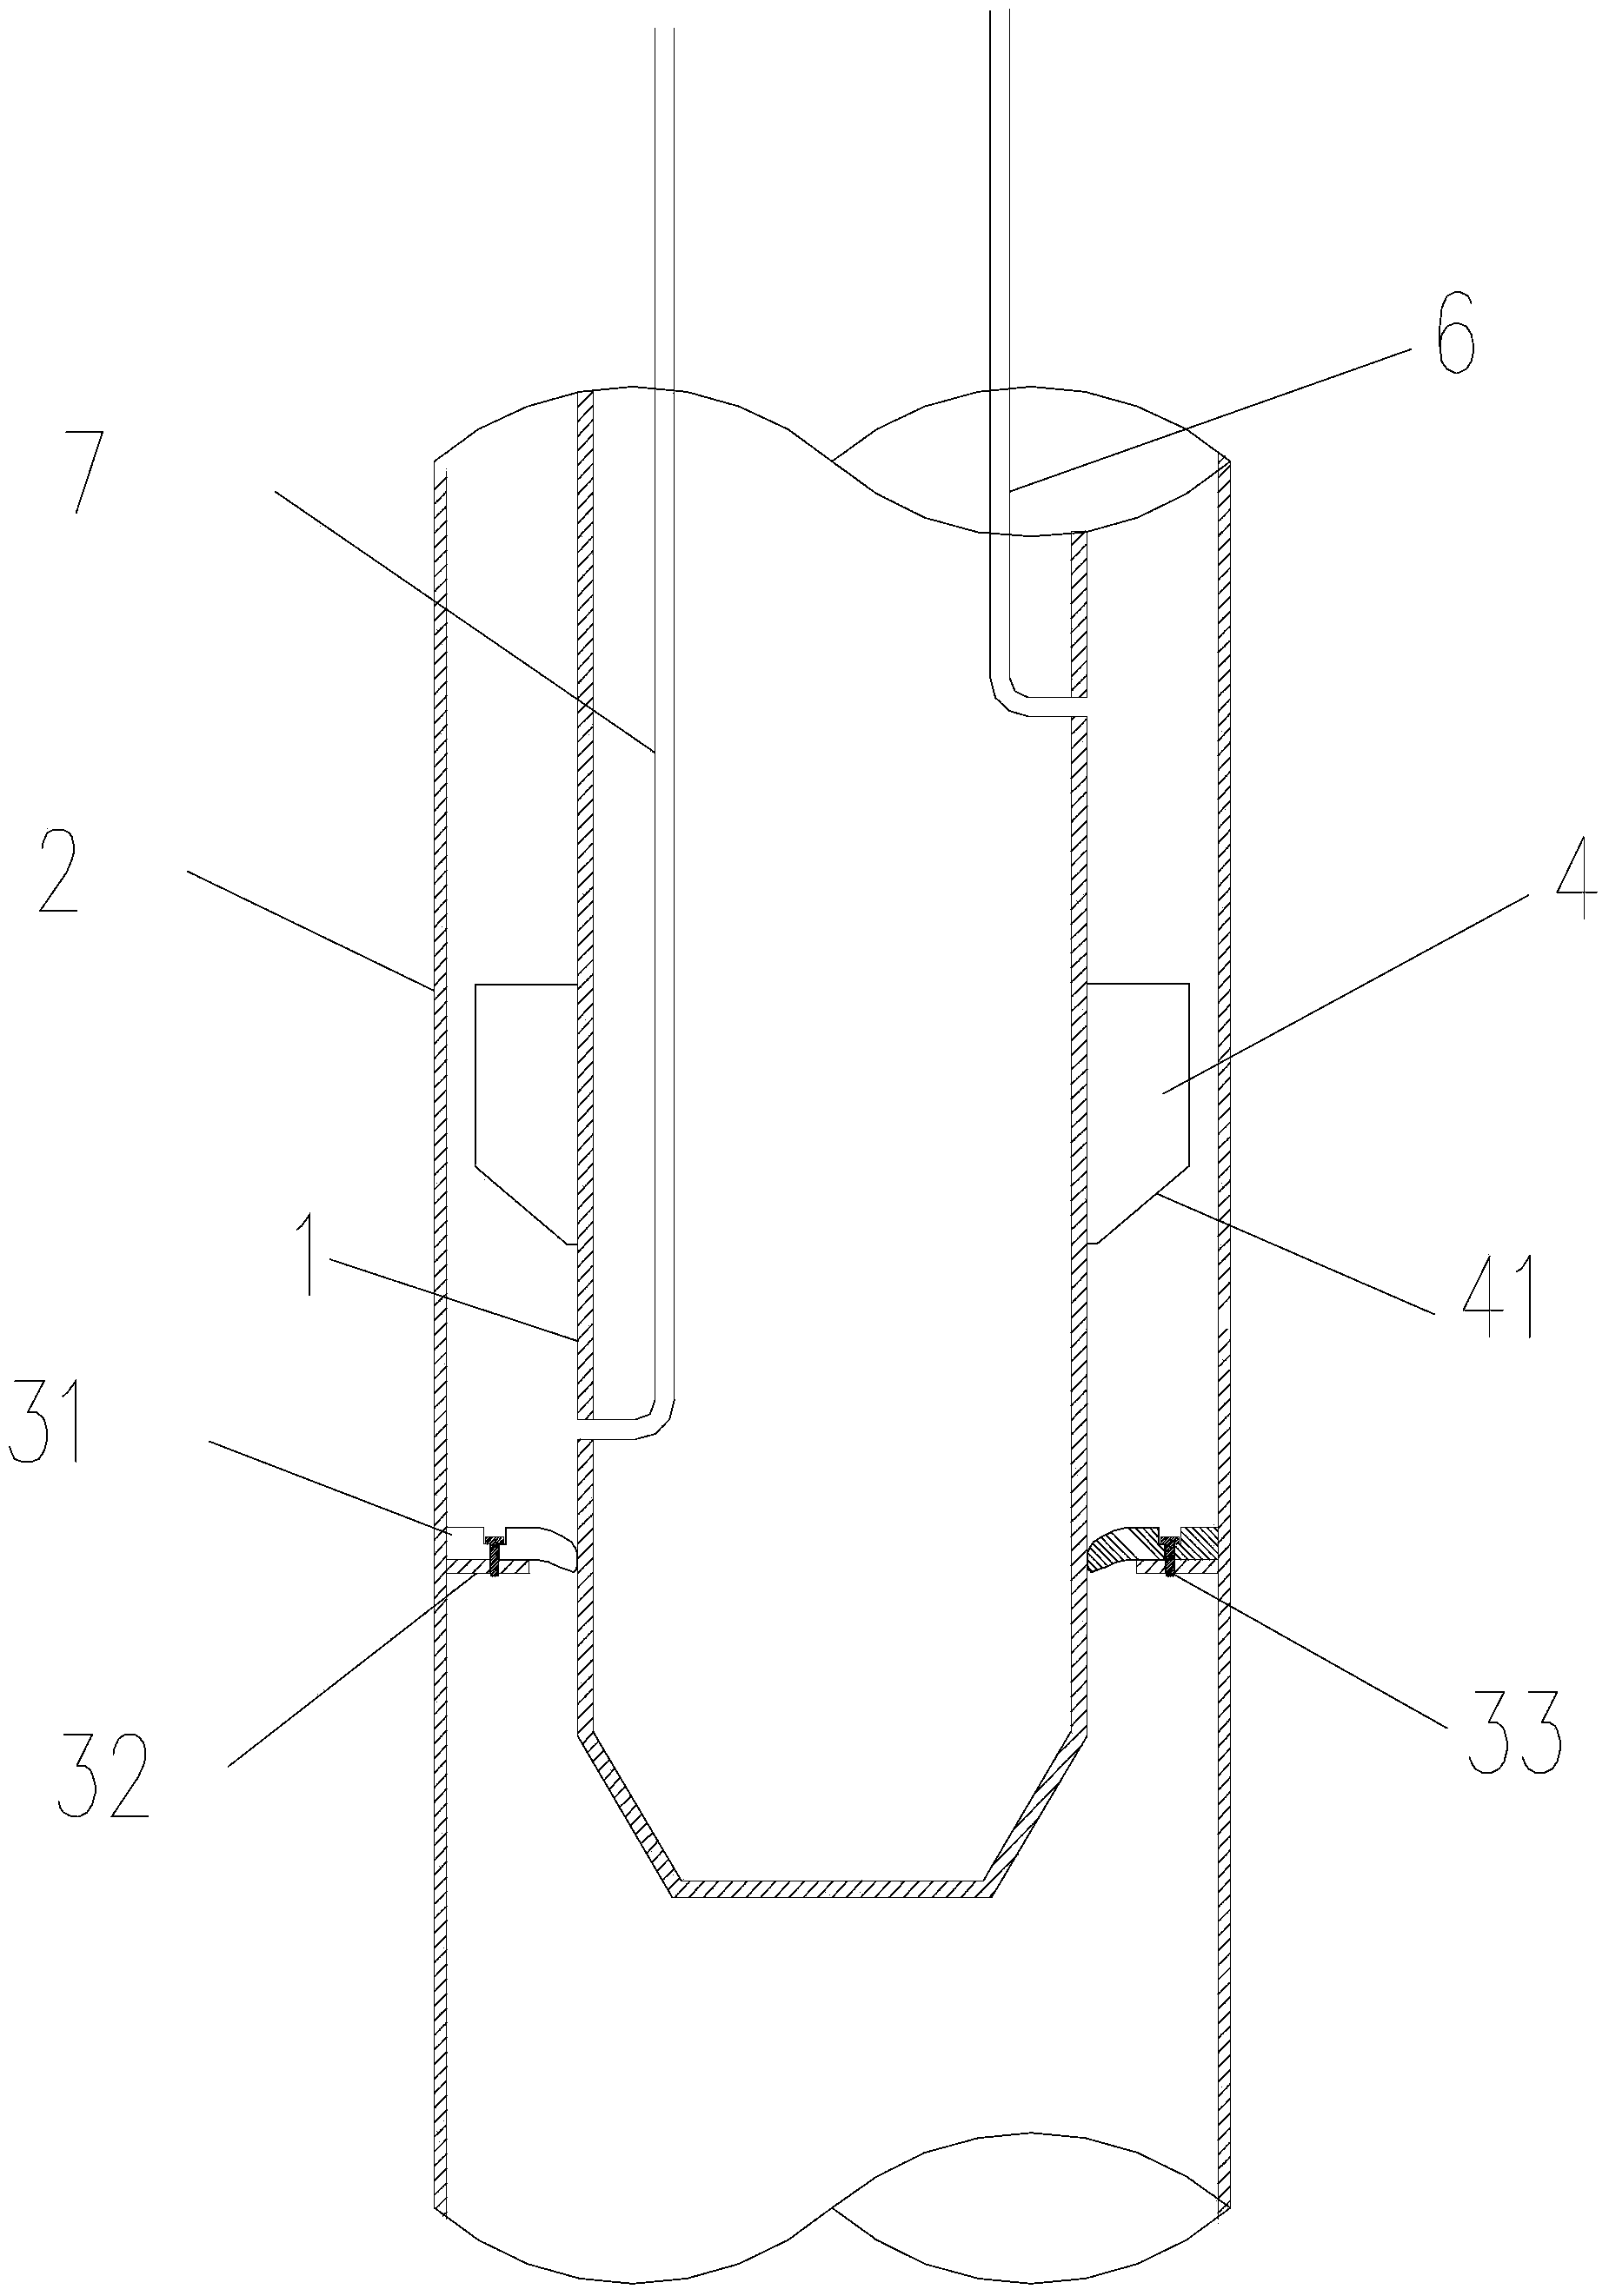 Connecting structure for jacket foundation and underwater pile foundation of offshore wind turbine and grouting method